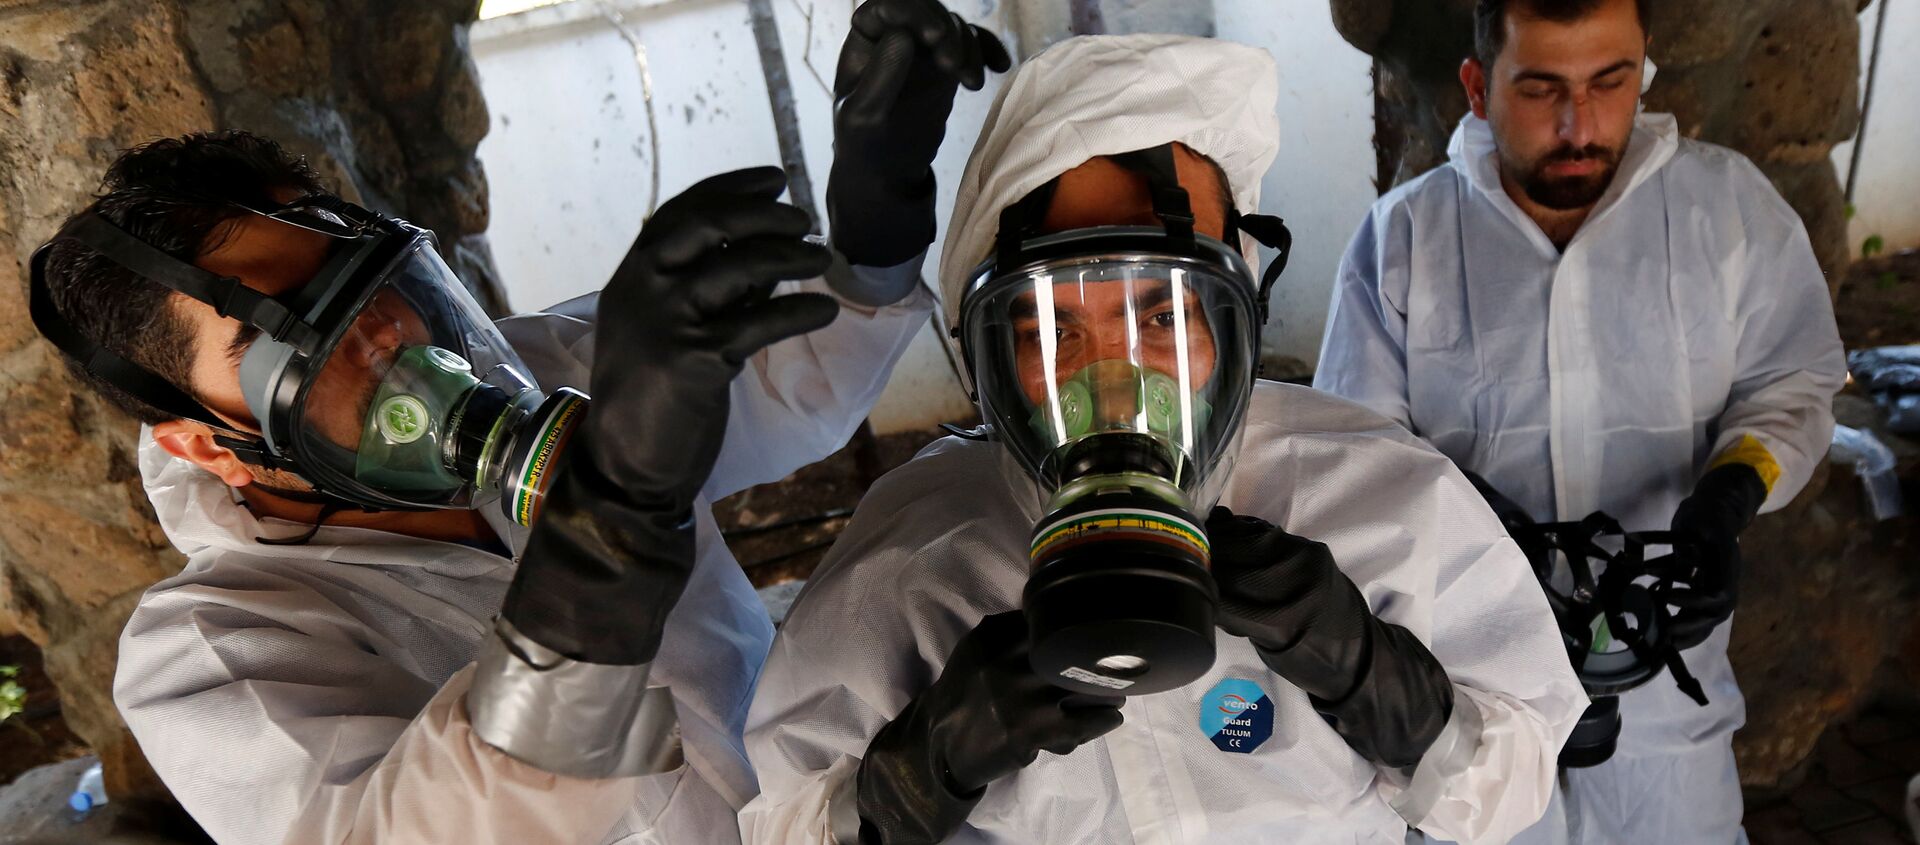 Syrian medical staff take part in a training exercise to learn how to treat victims of chemical weapons attacks, in a course organized by the World Health Organisation (WHO) in Gaziantep, Turkey, July 20, 2017 - Sputnik International, 1920